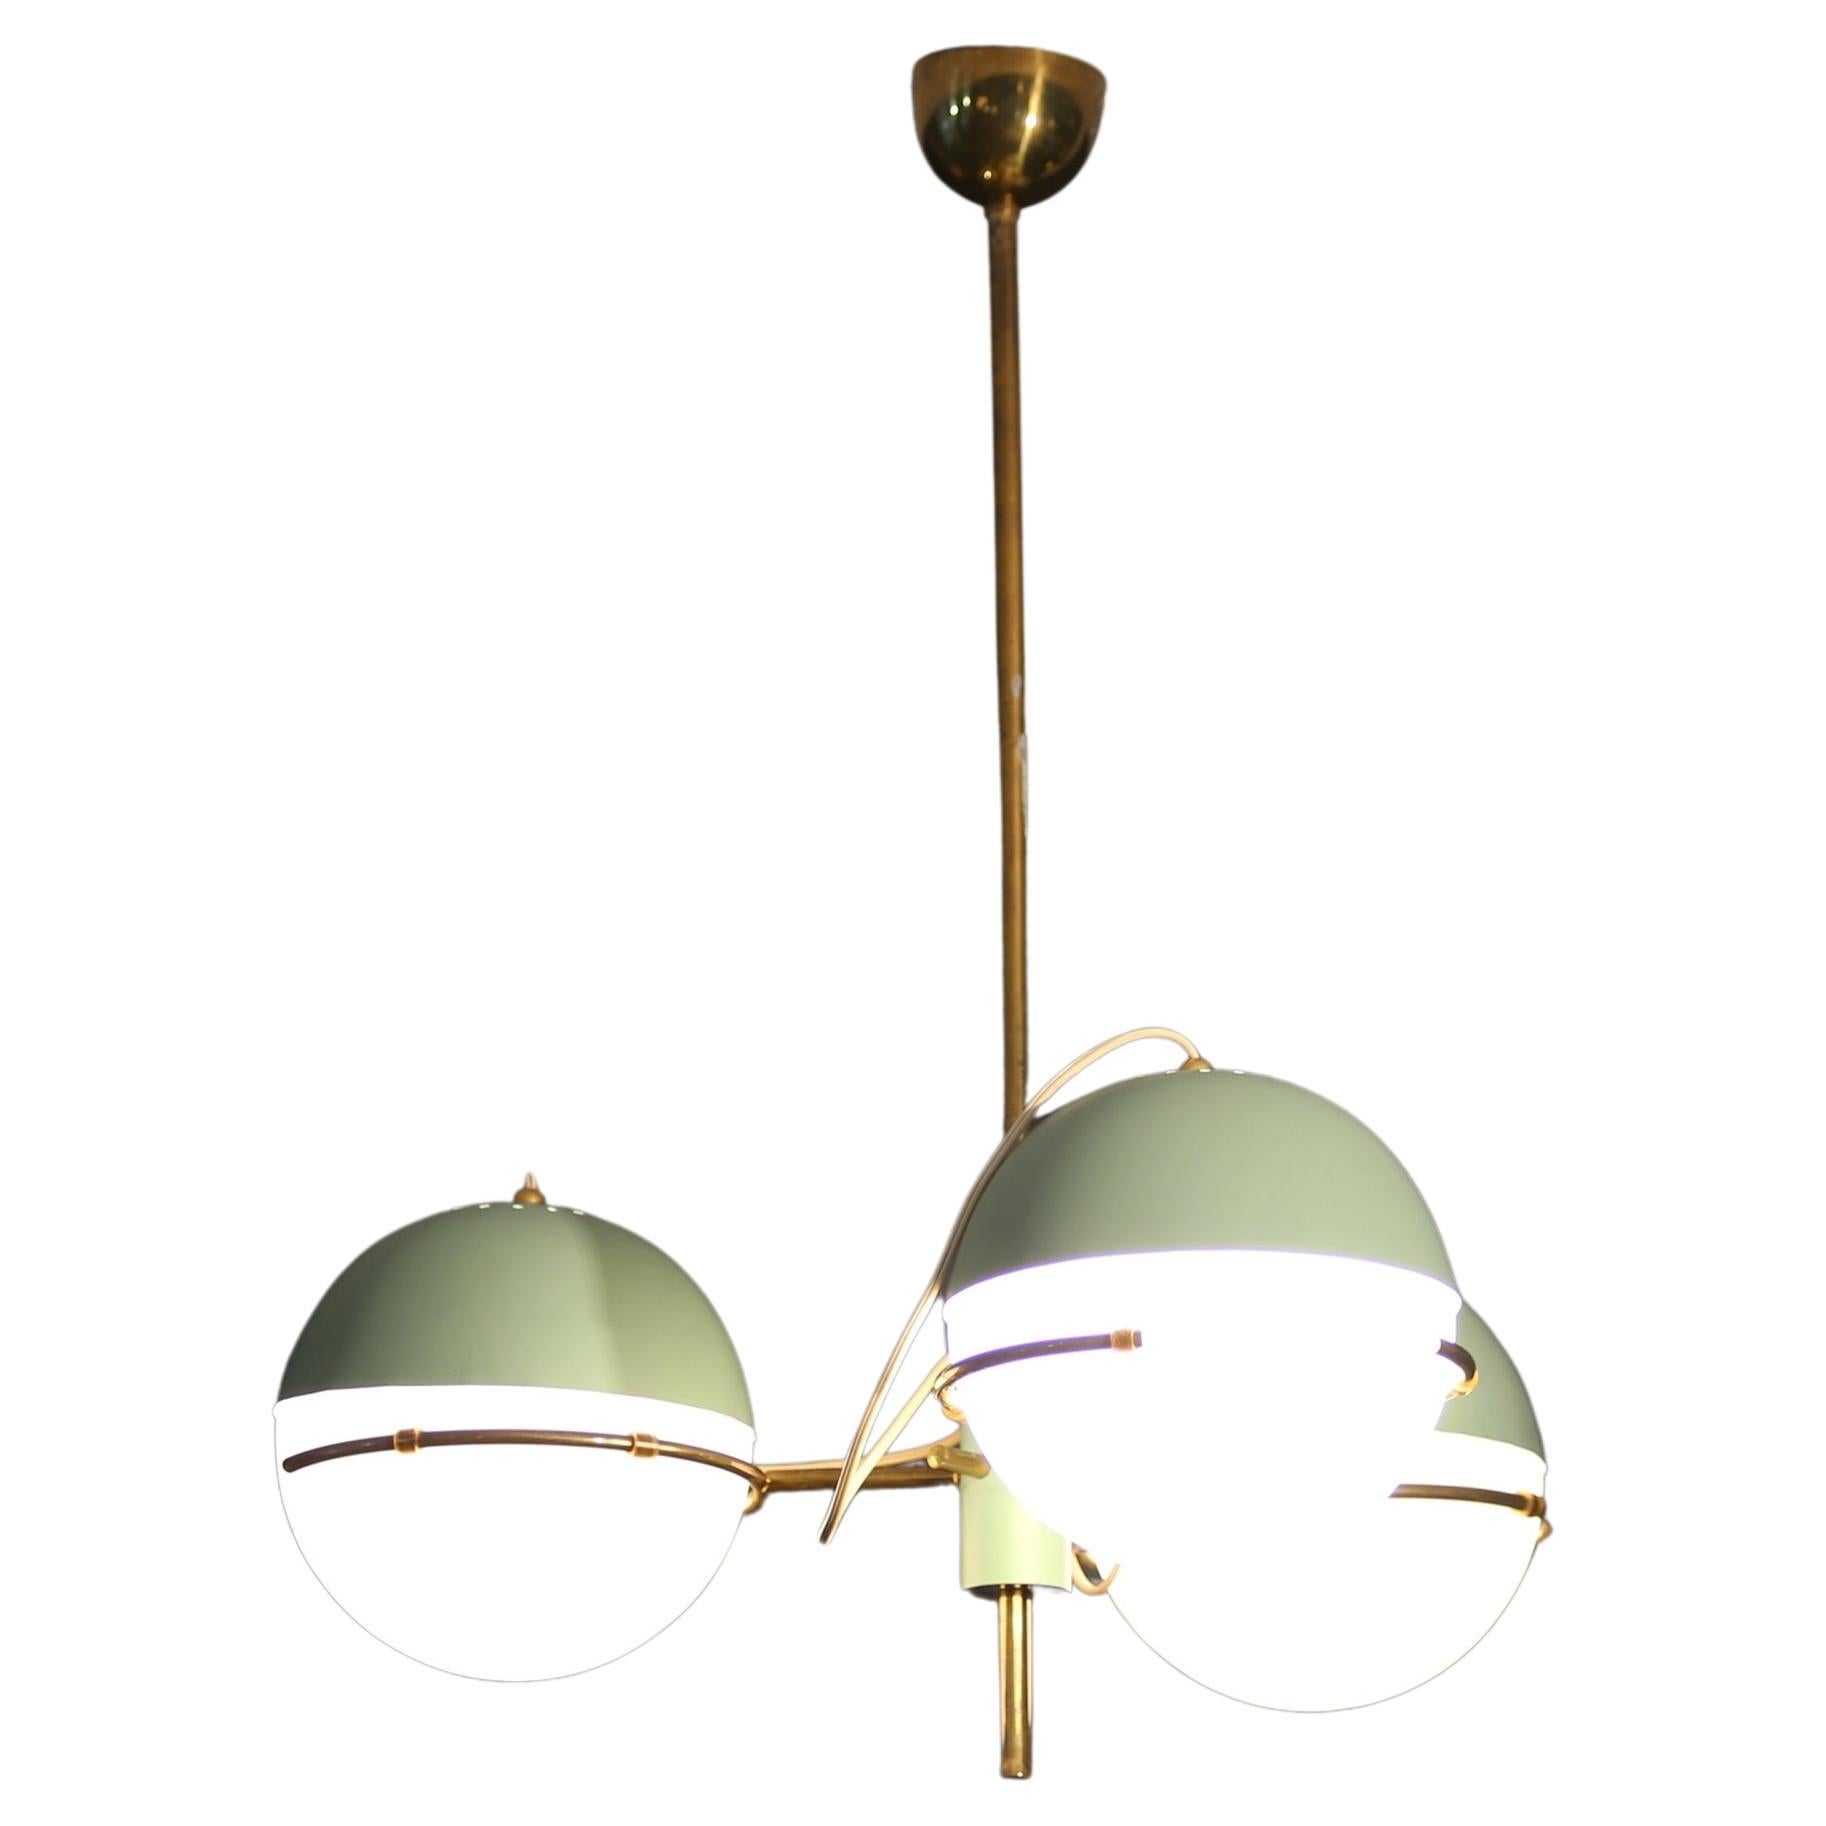 Stilnovo Pendant lamp with three brass and opaline glass lights from the 1950s.